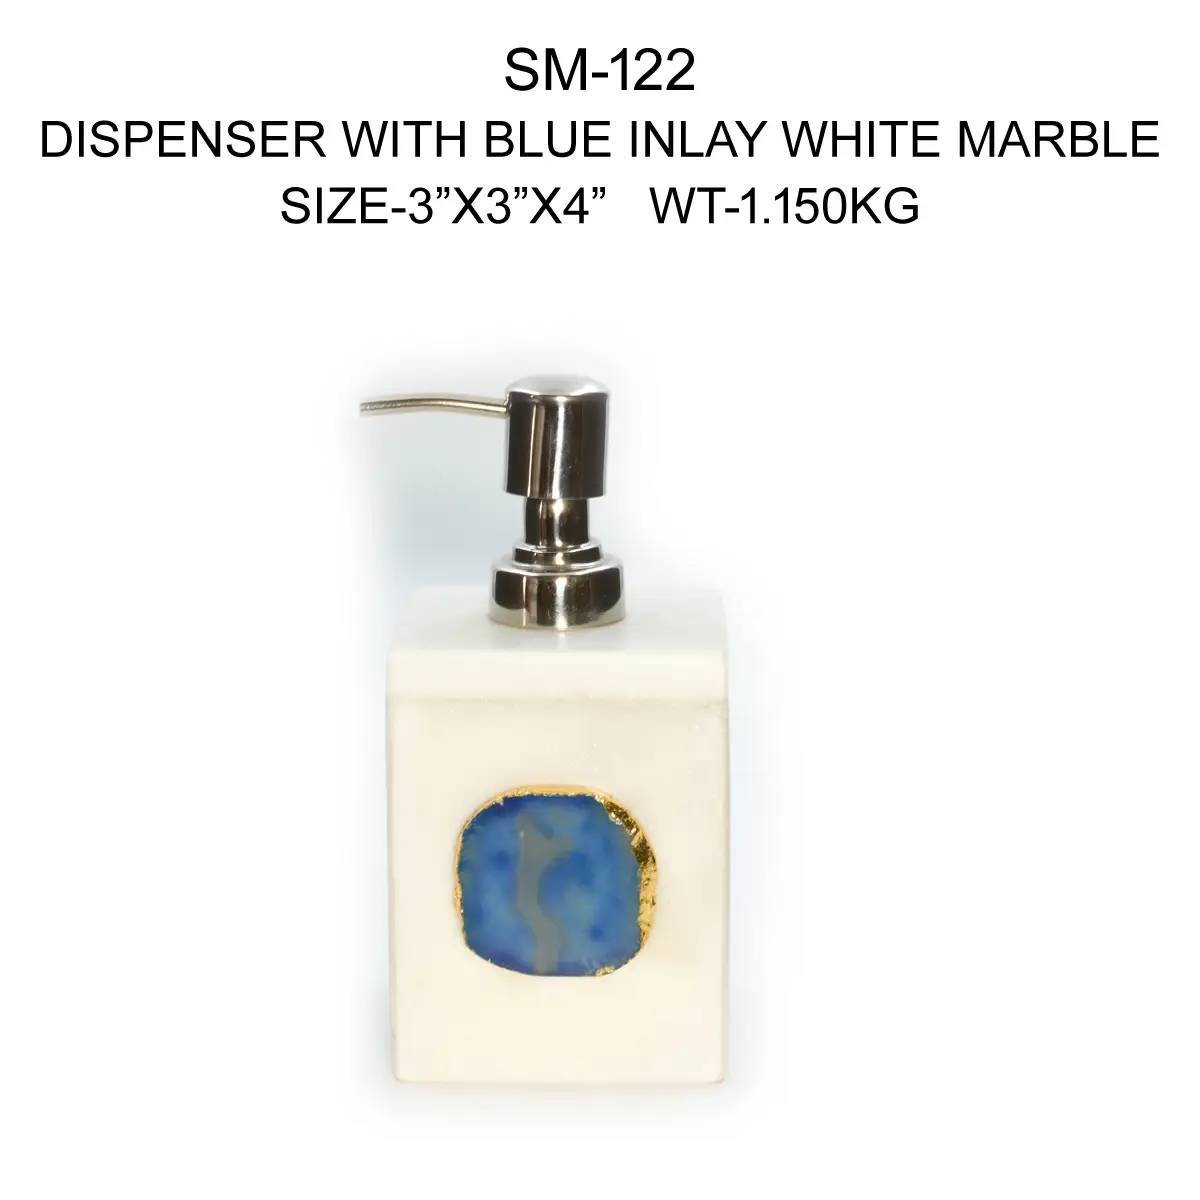 DISPENSER WITH BLUE INLAY WHITE MARBLE